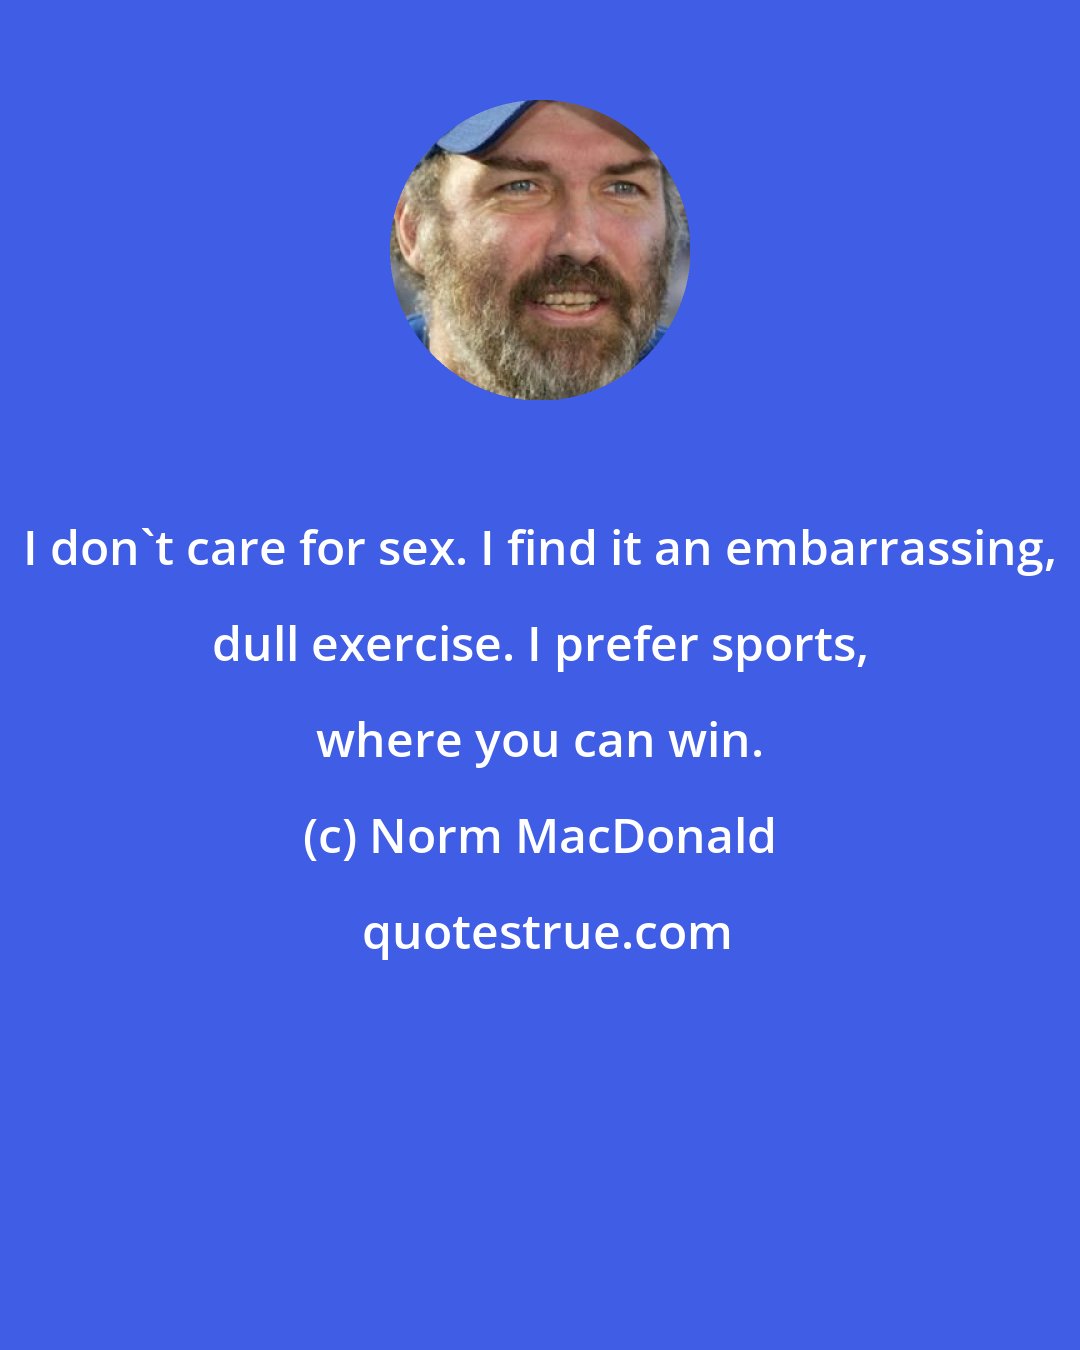 Norm MacDonald: I don't care for sex. I find it an embarrassing, dull exercise. I prefer sports, where you can win.